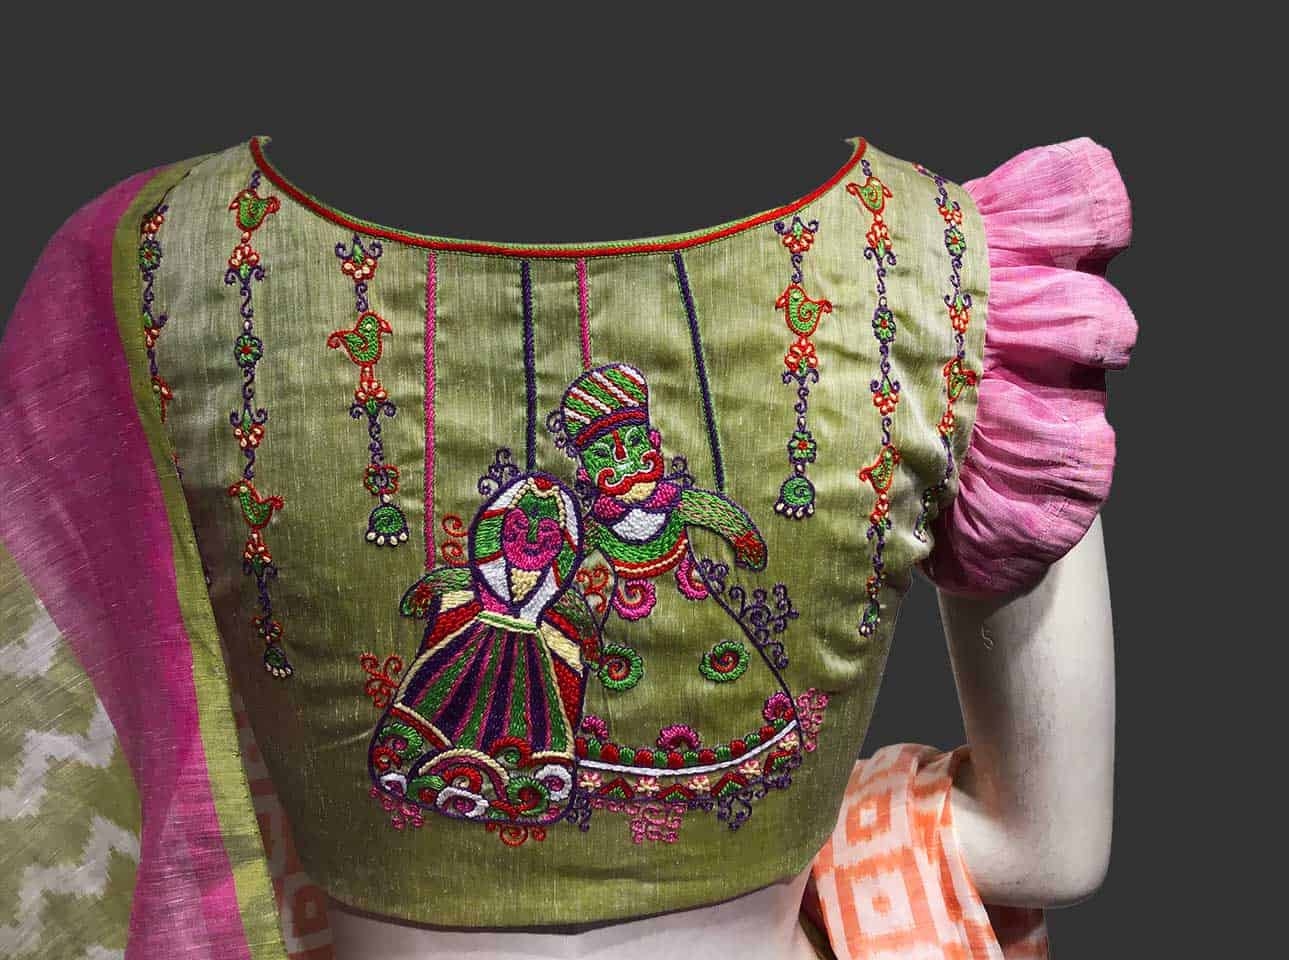 Simple Machine Embroidery Designs For Saree Blouse Healthy Care,Creative Cake Designs For Girls